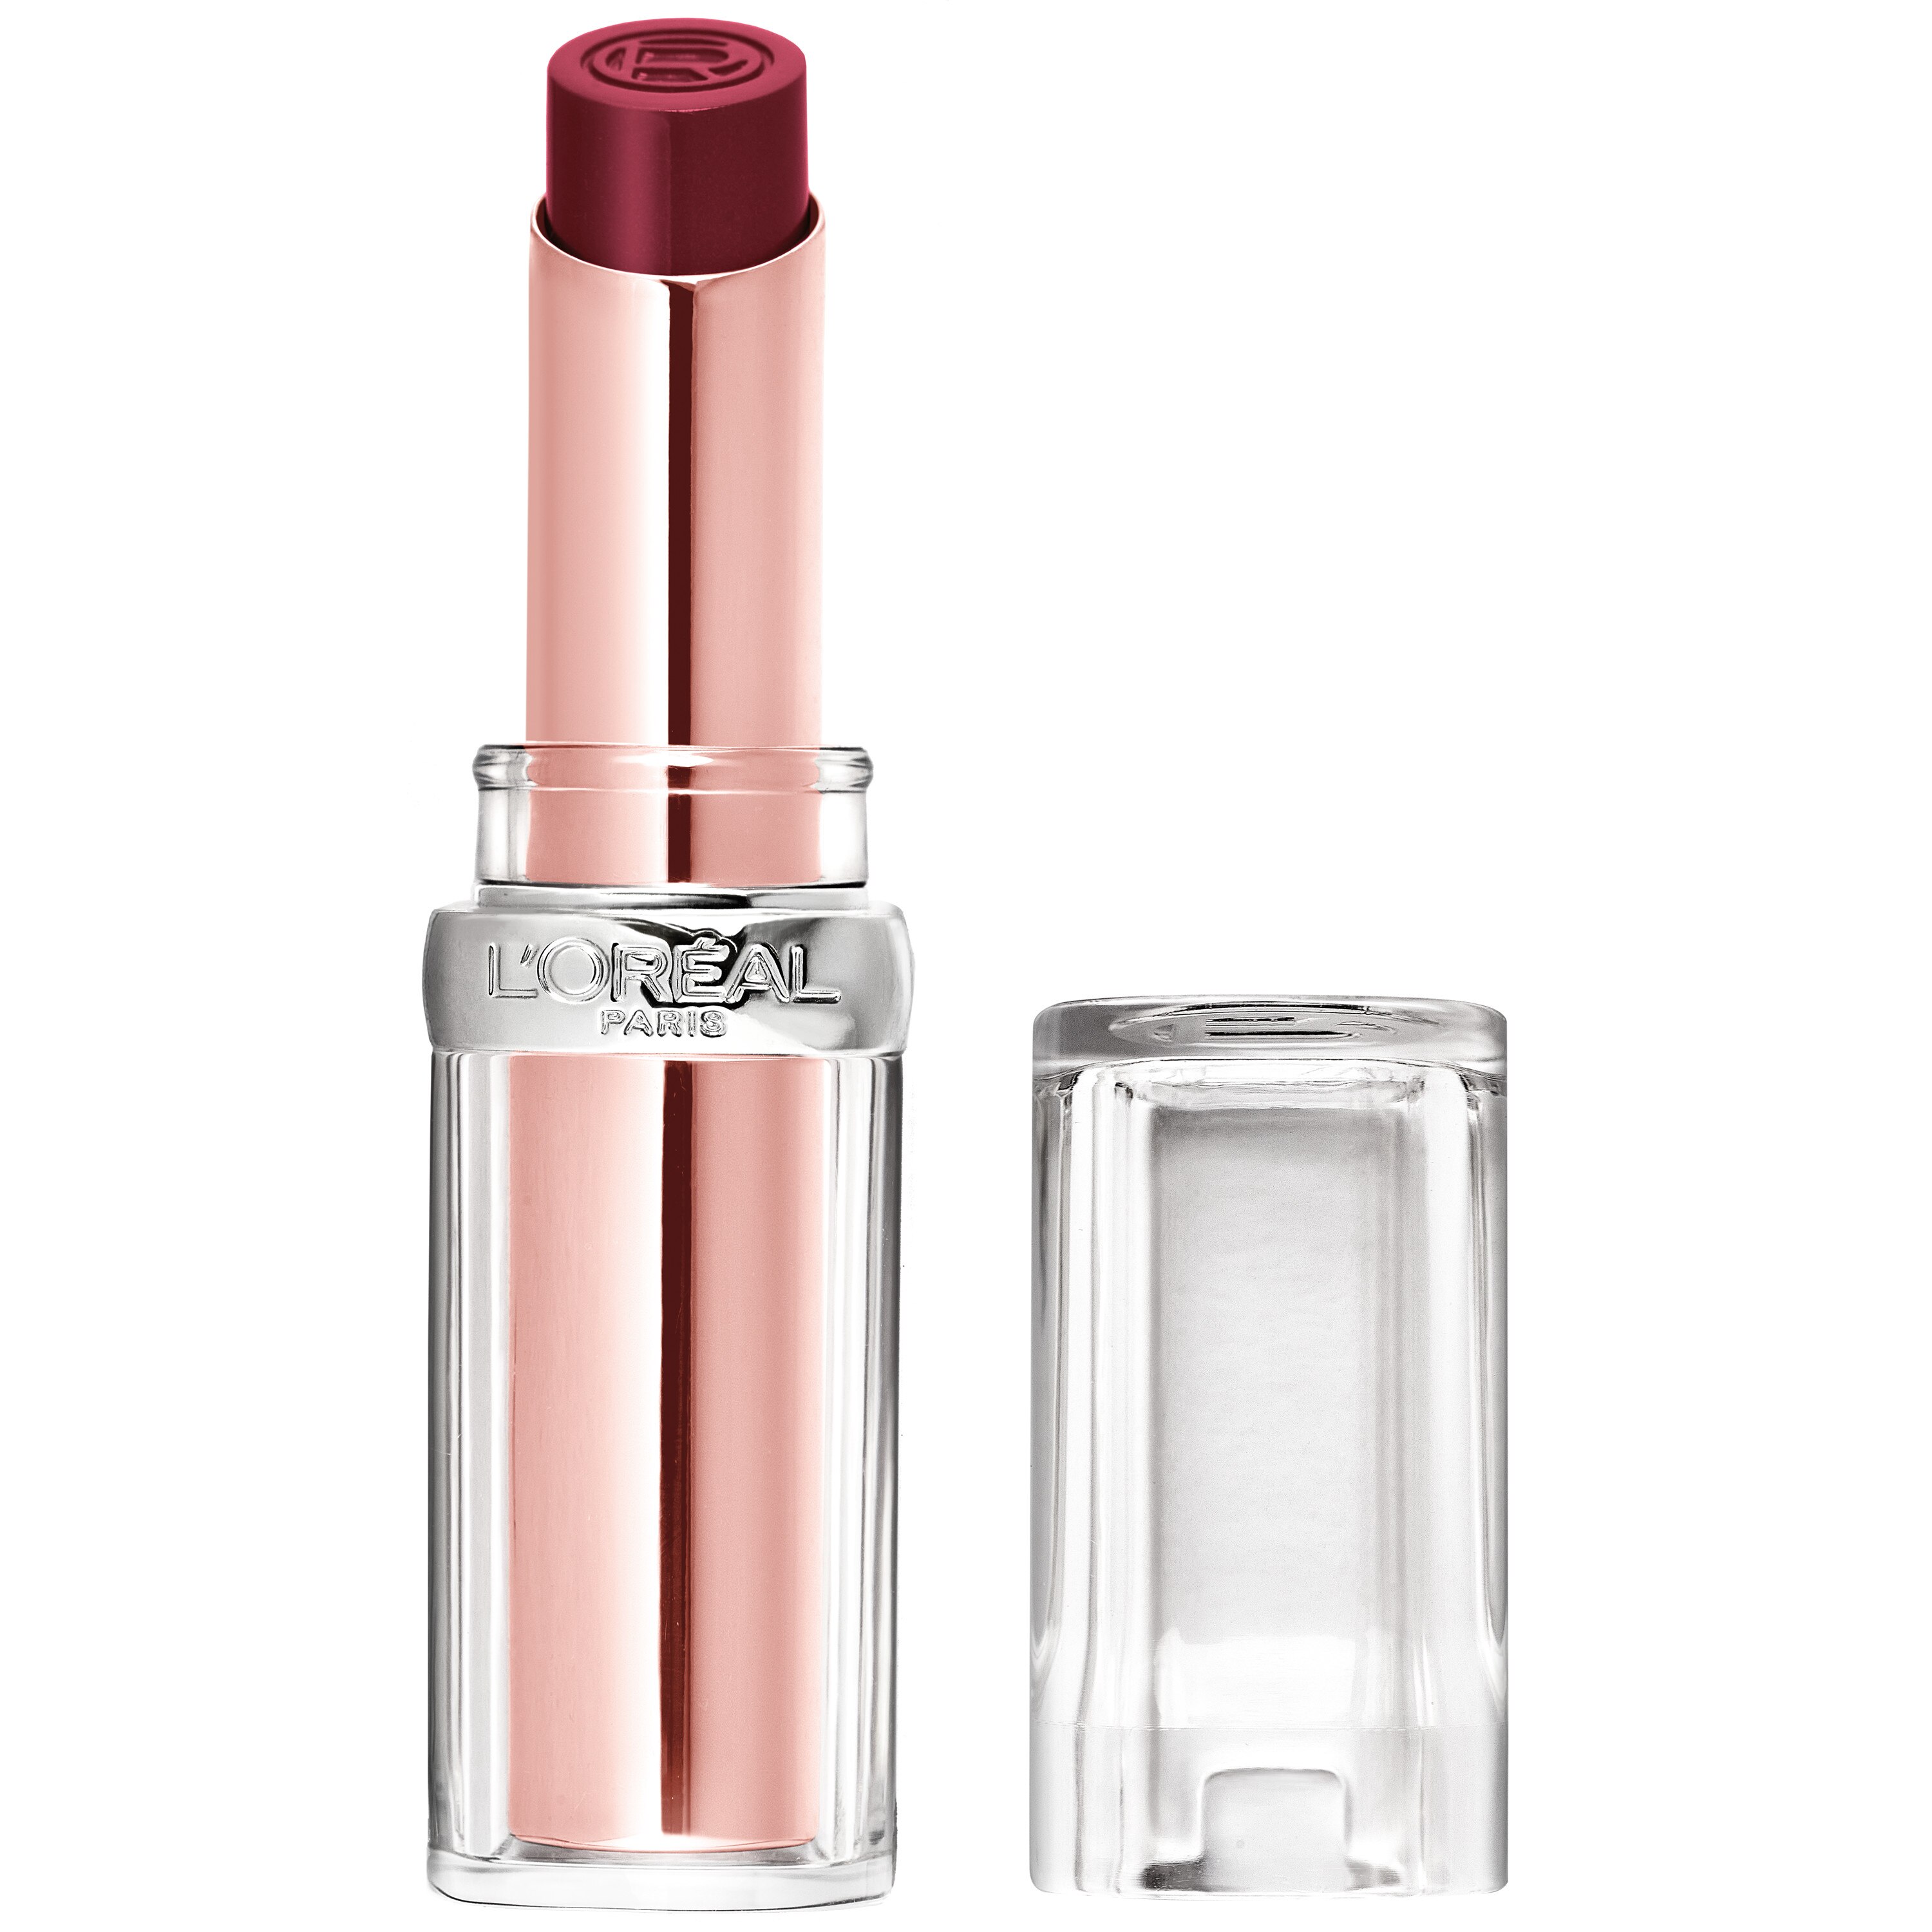 L'Oreal Paris Glow Paradise Balm-in-Lipstick with Pomegranate Extract